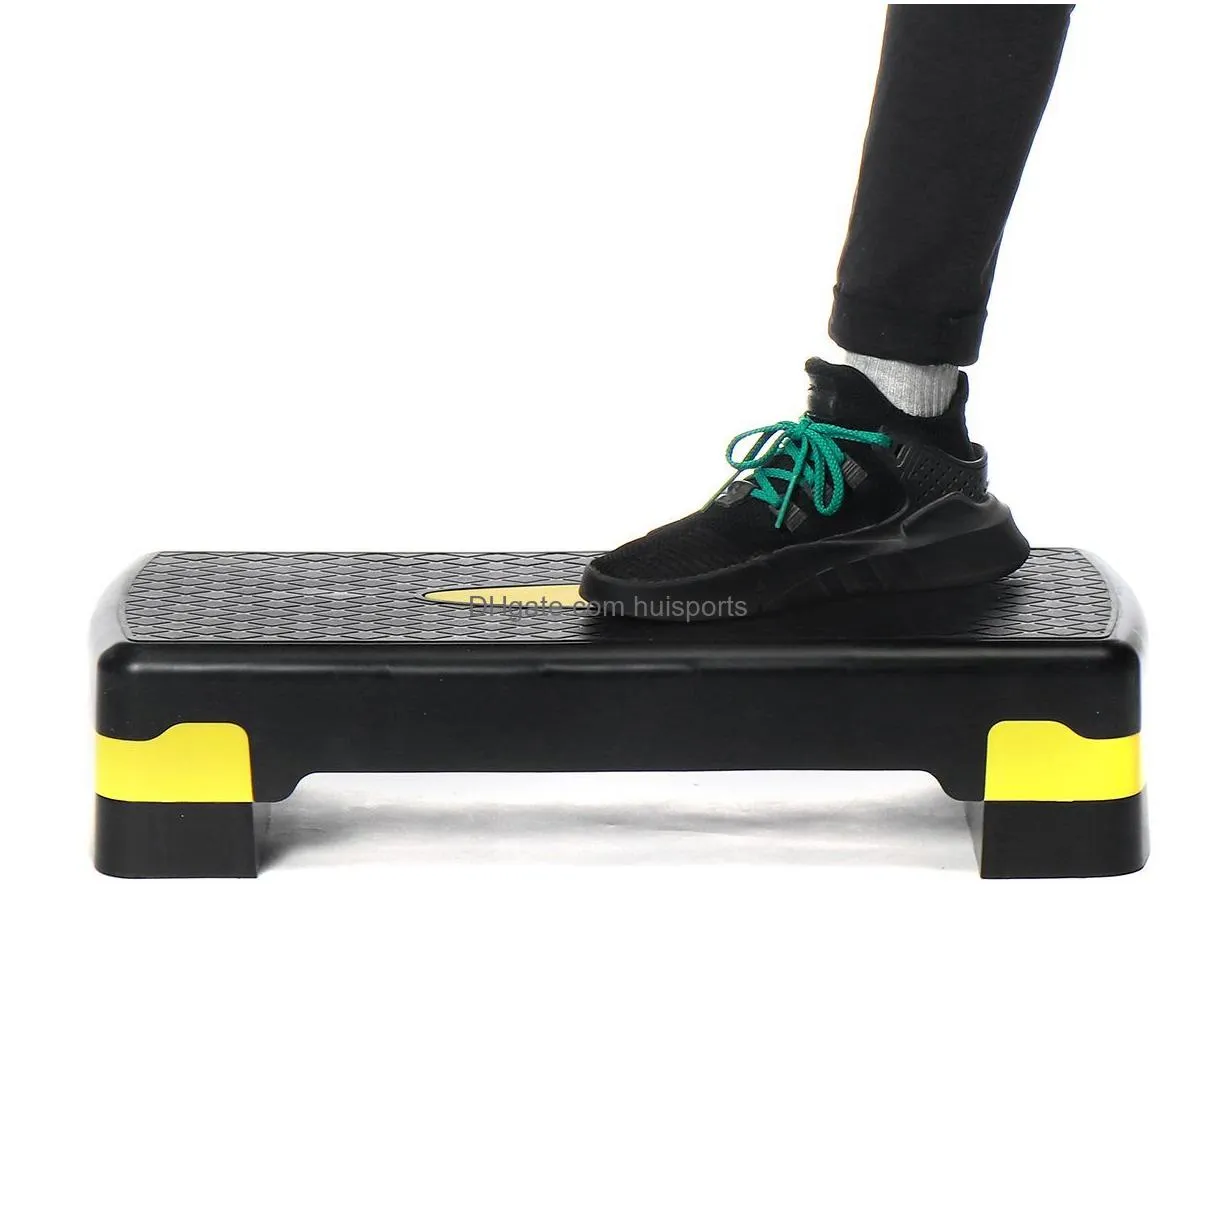 fitness aerobic step adjustable non-slip cardio yoga pedal stepper gym workout exercise fitness aerobic step equipment 100kg